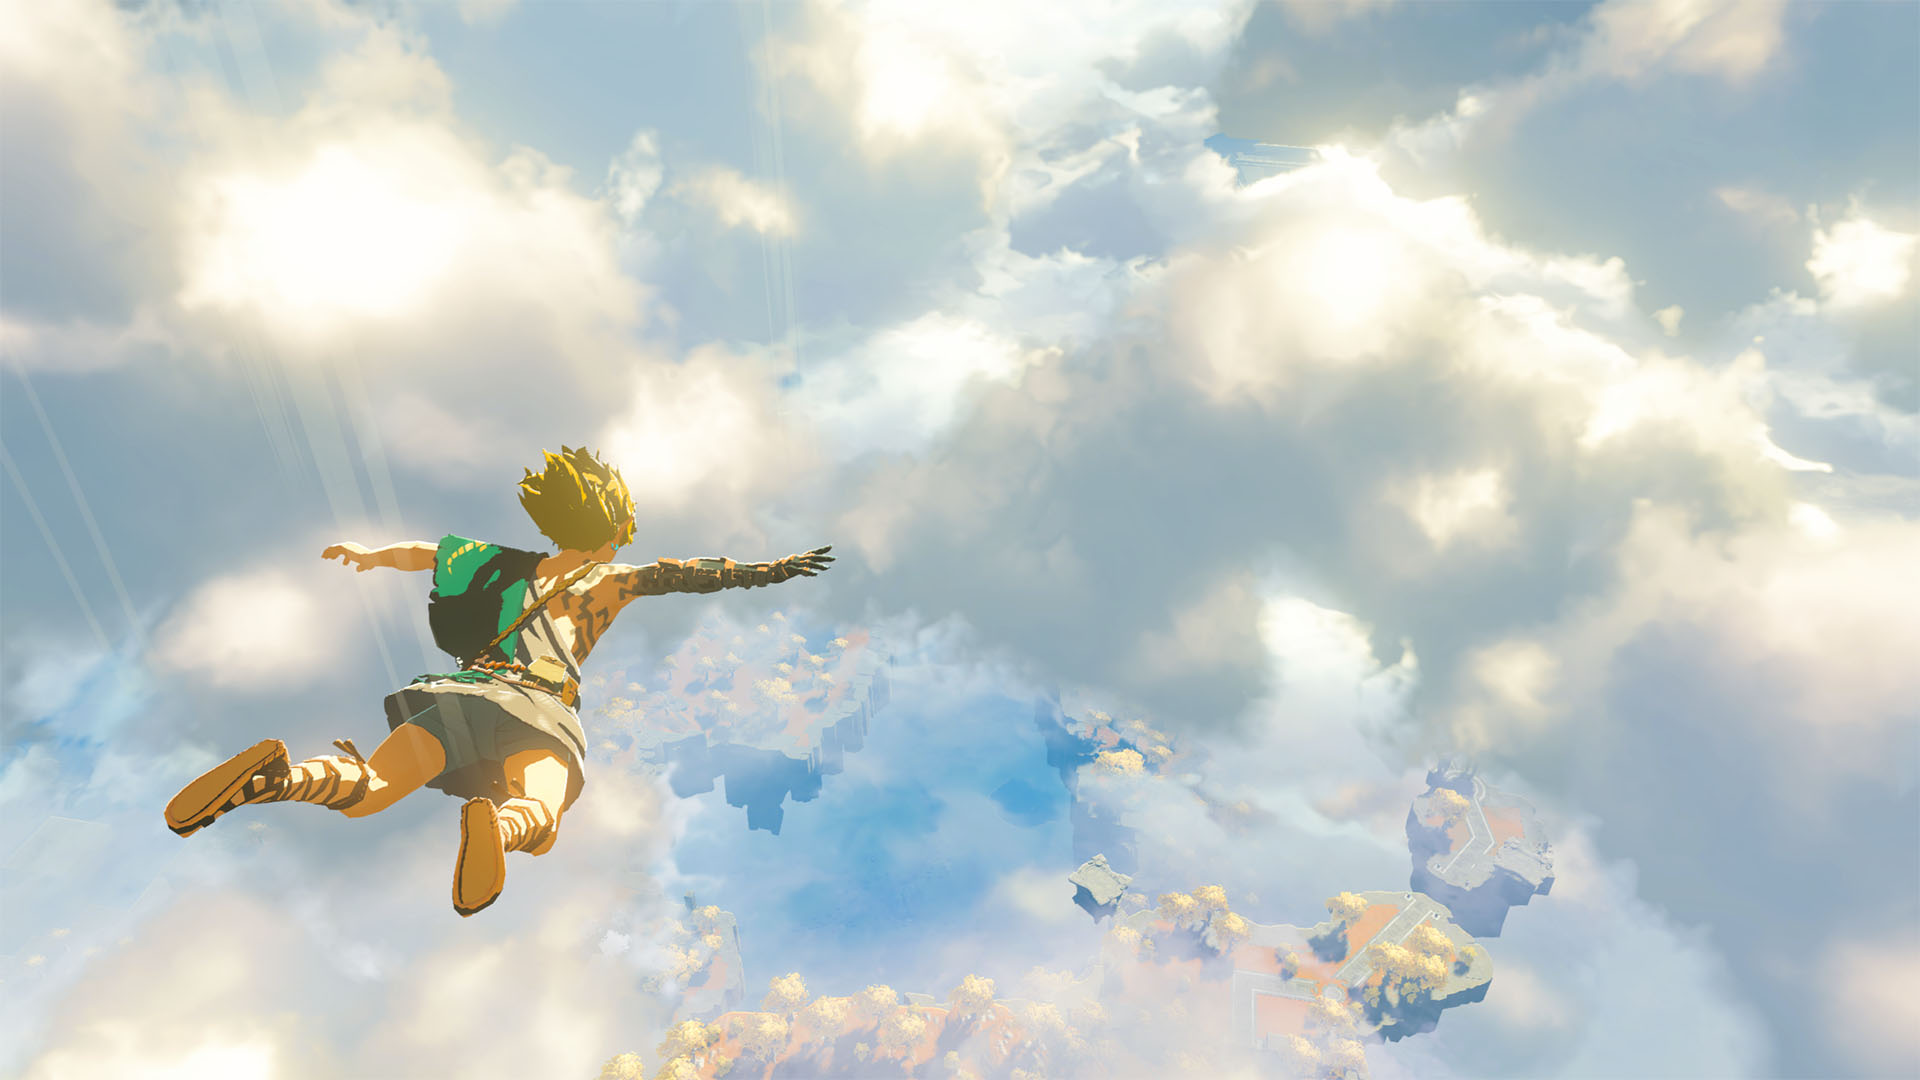 Breath of the Wild 2 is still on track for a 2022 release